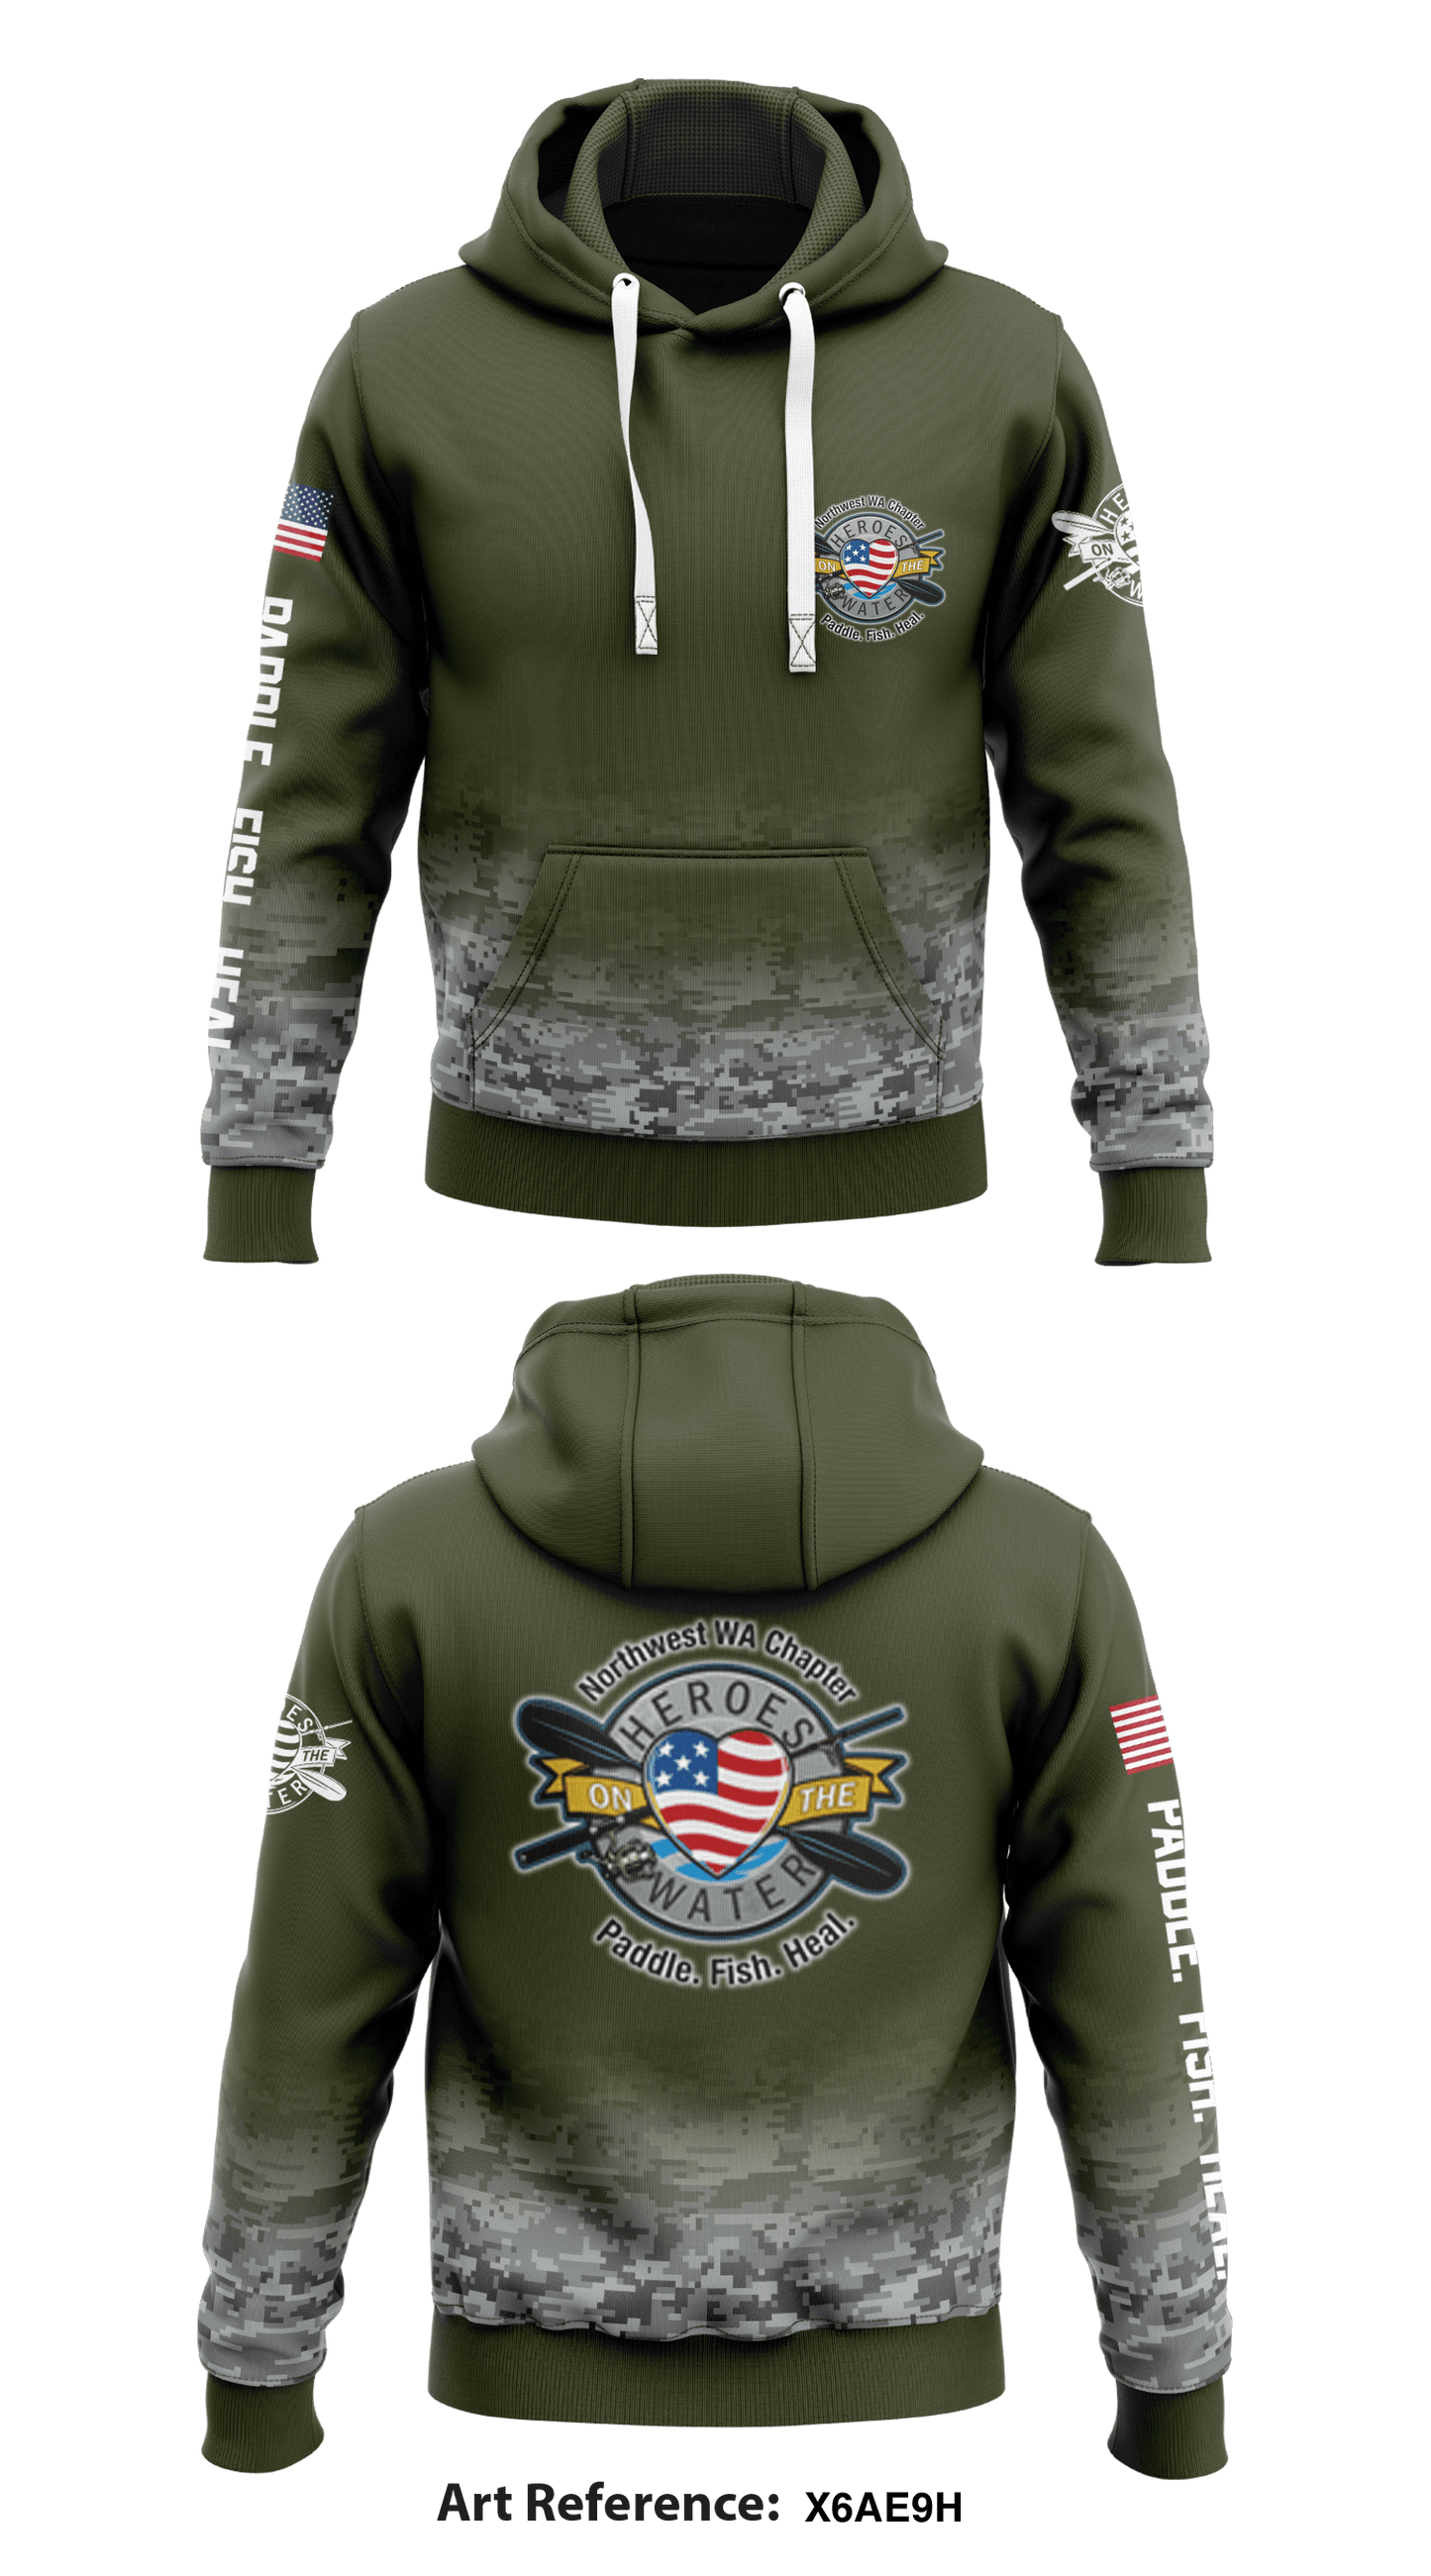 Heroes On the Water Northwest WA Chapter Store 1  Core Men's Hooded Performance Sweatshirt - x6Ae9h